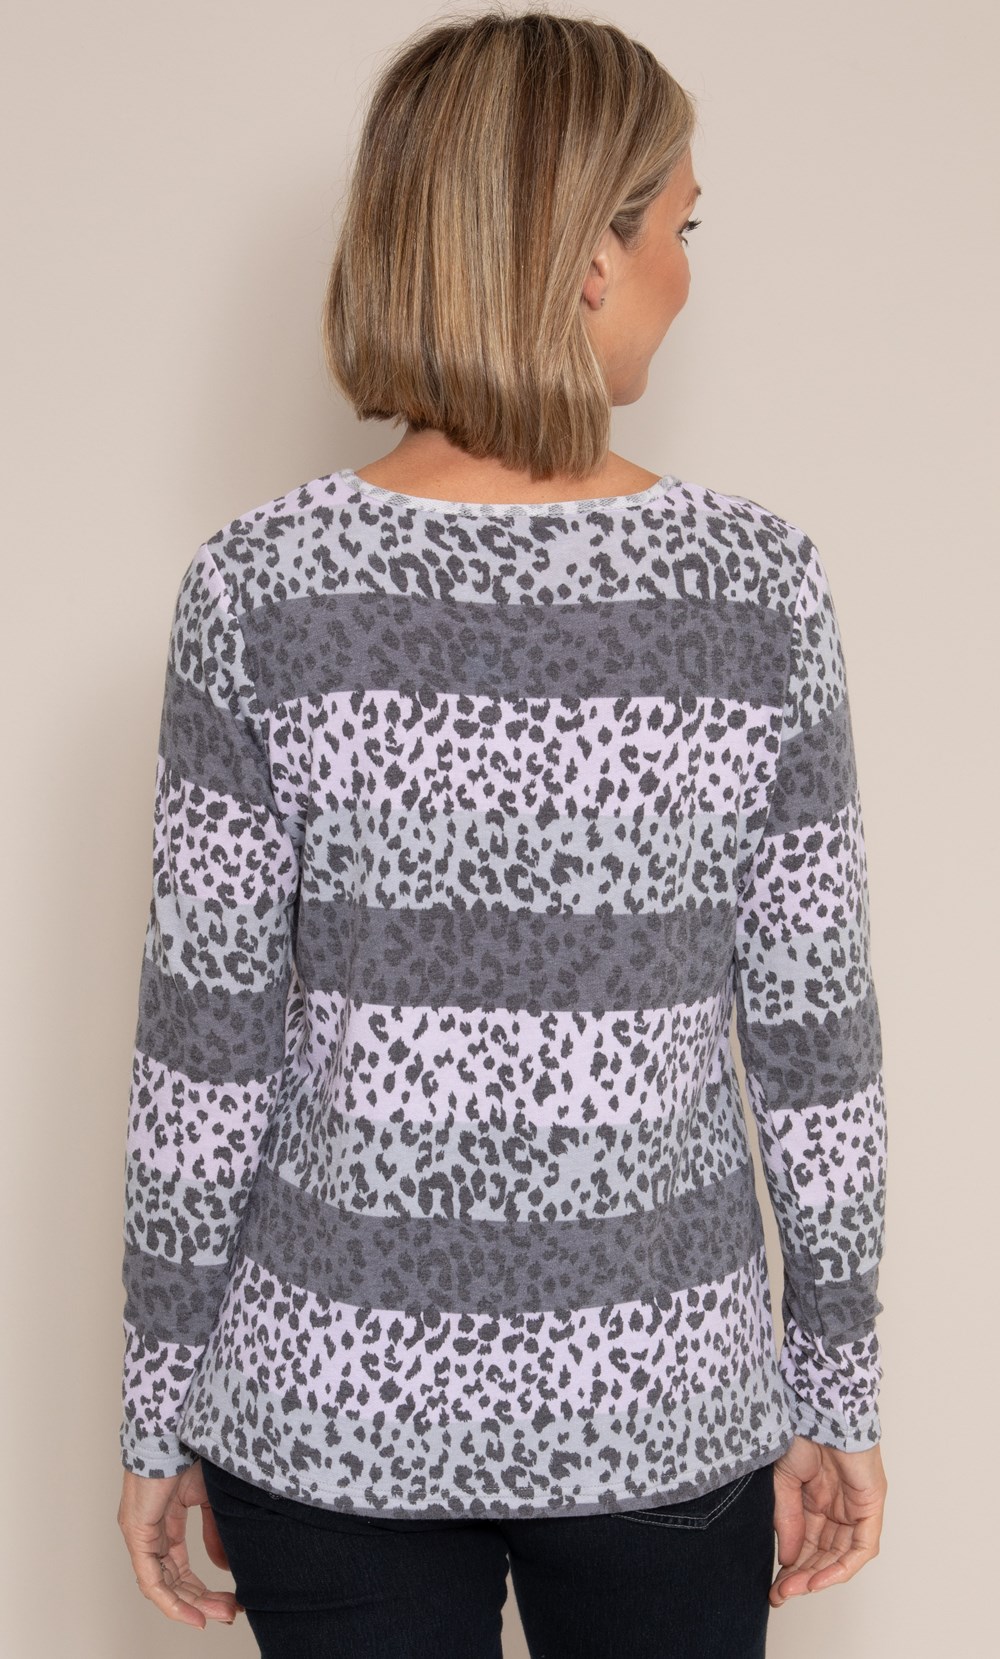 Anna Rose Stripe And Animal Print Knit Top